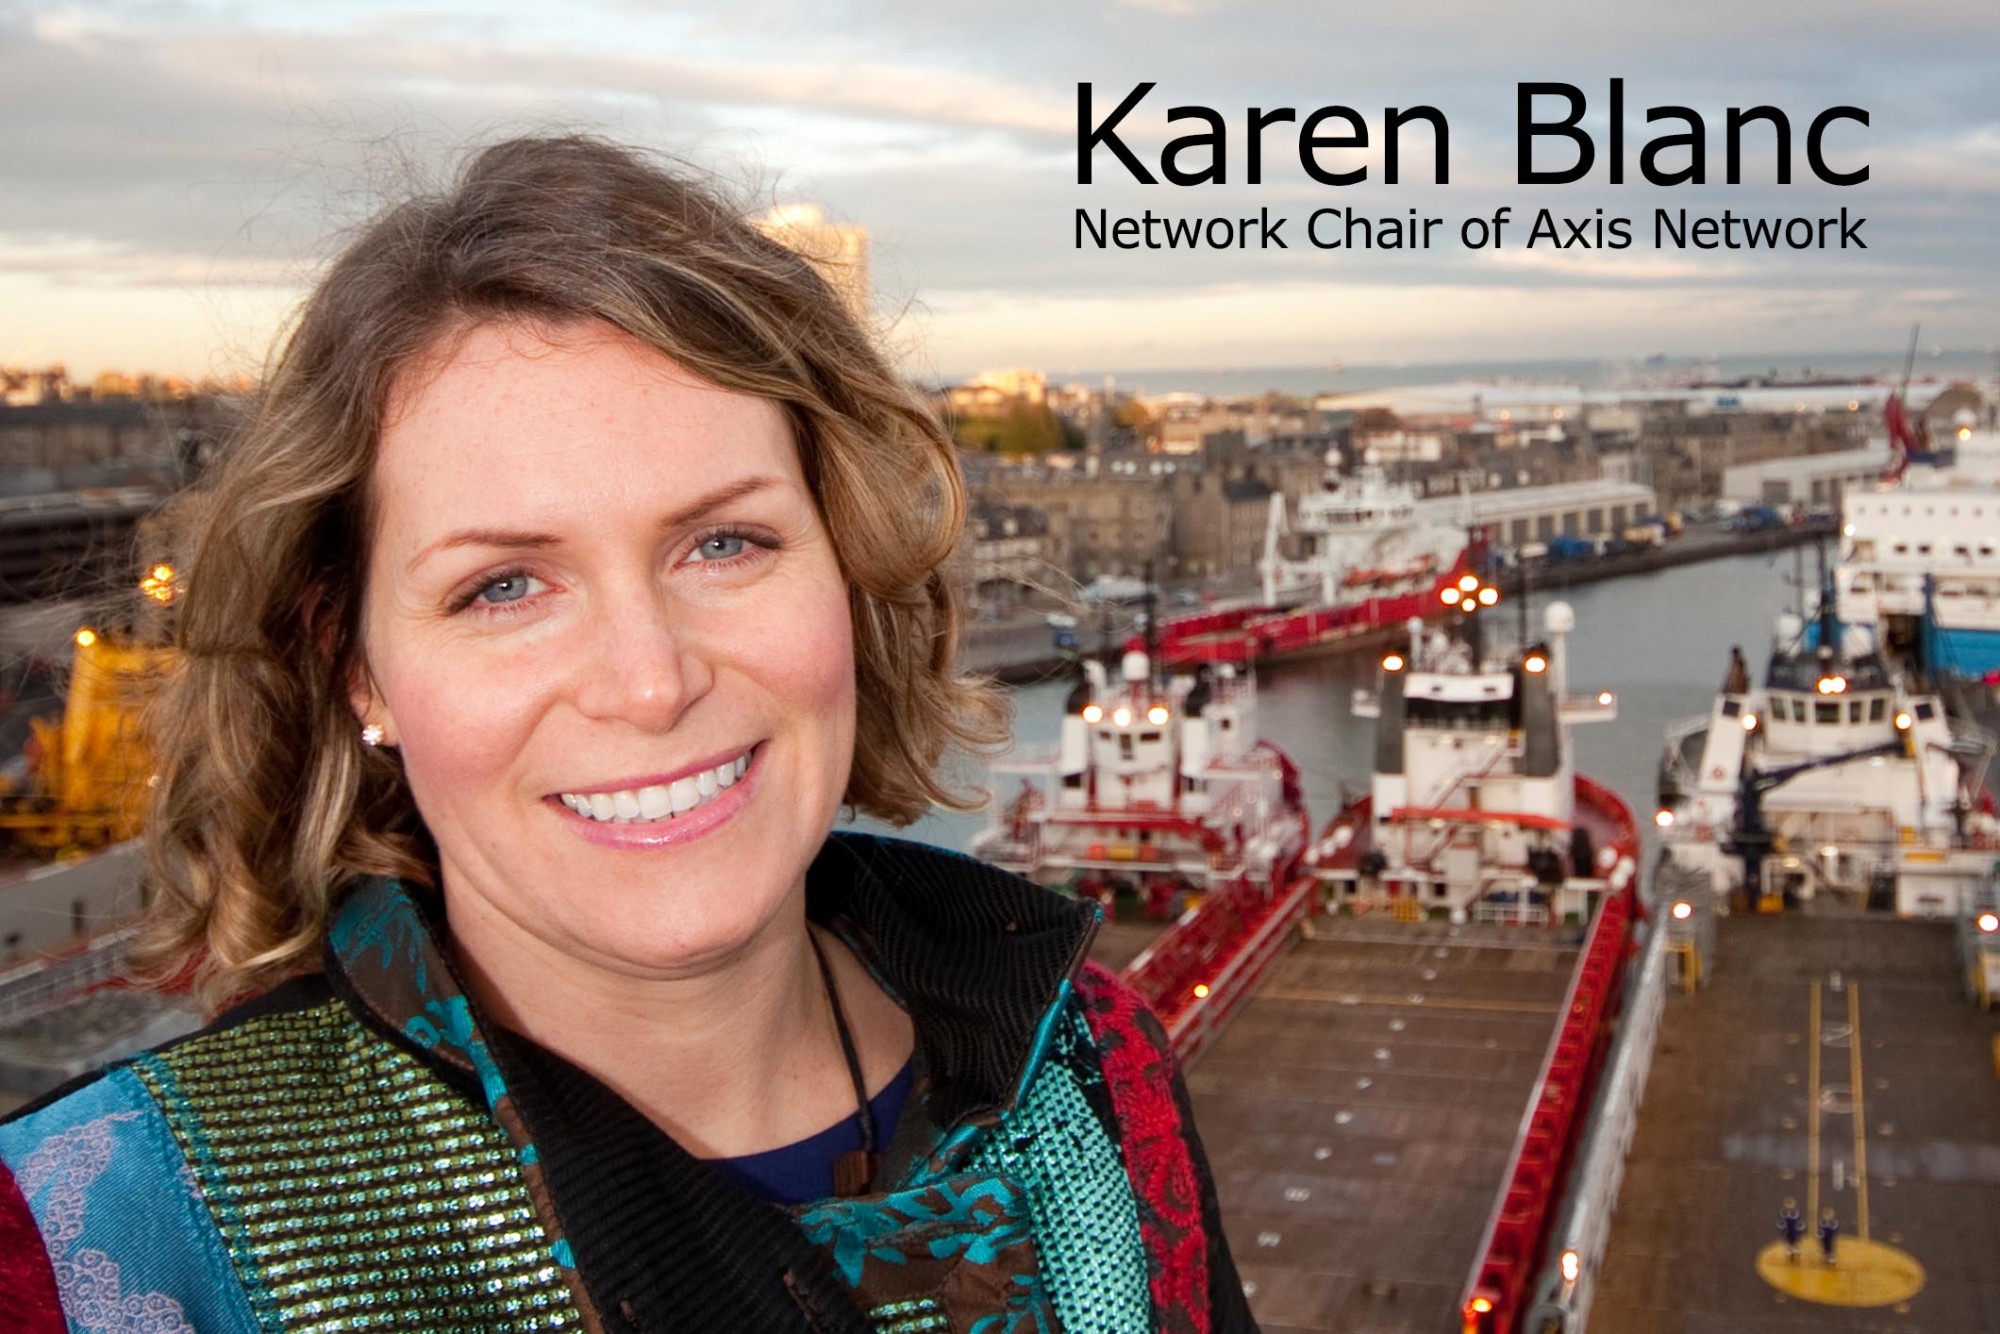 OGV Energy interview Karen Blanc – Network Chair of Axis Network